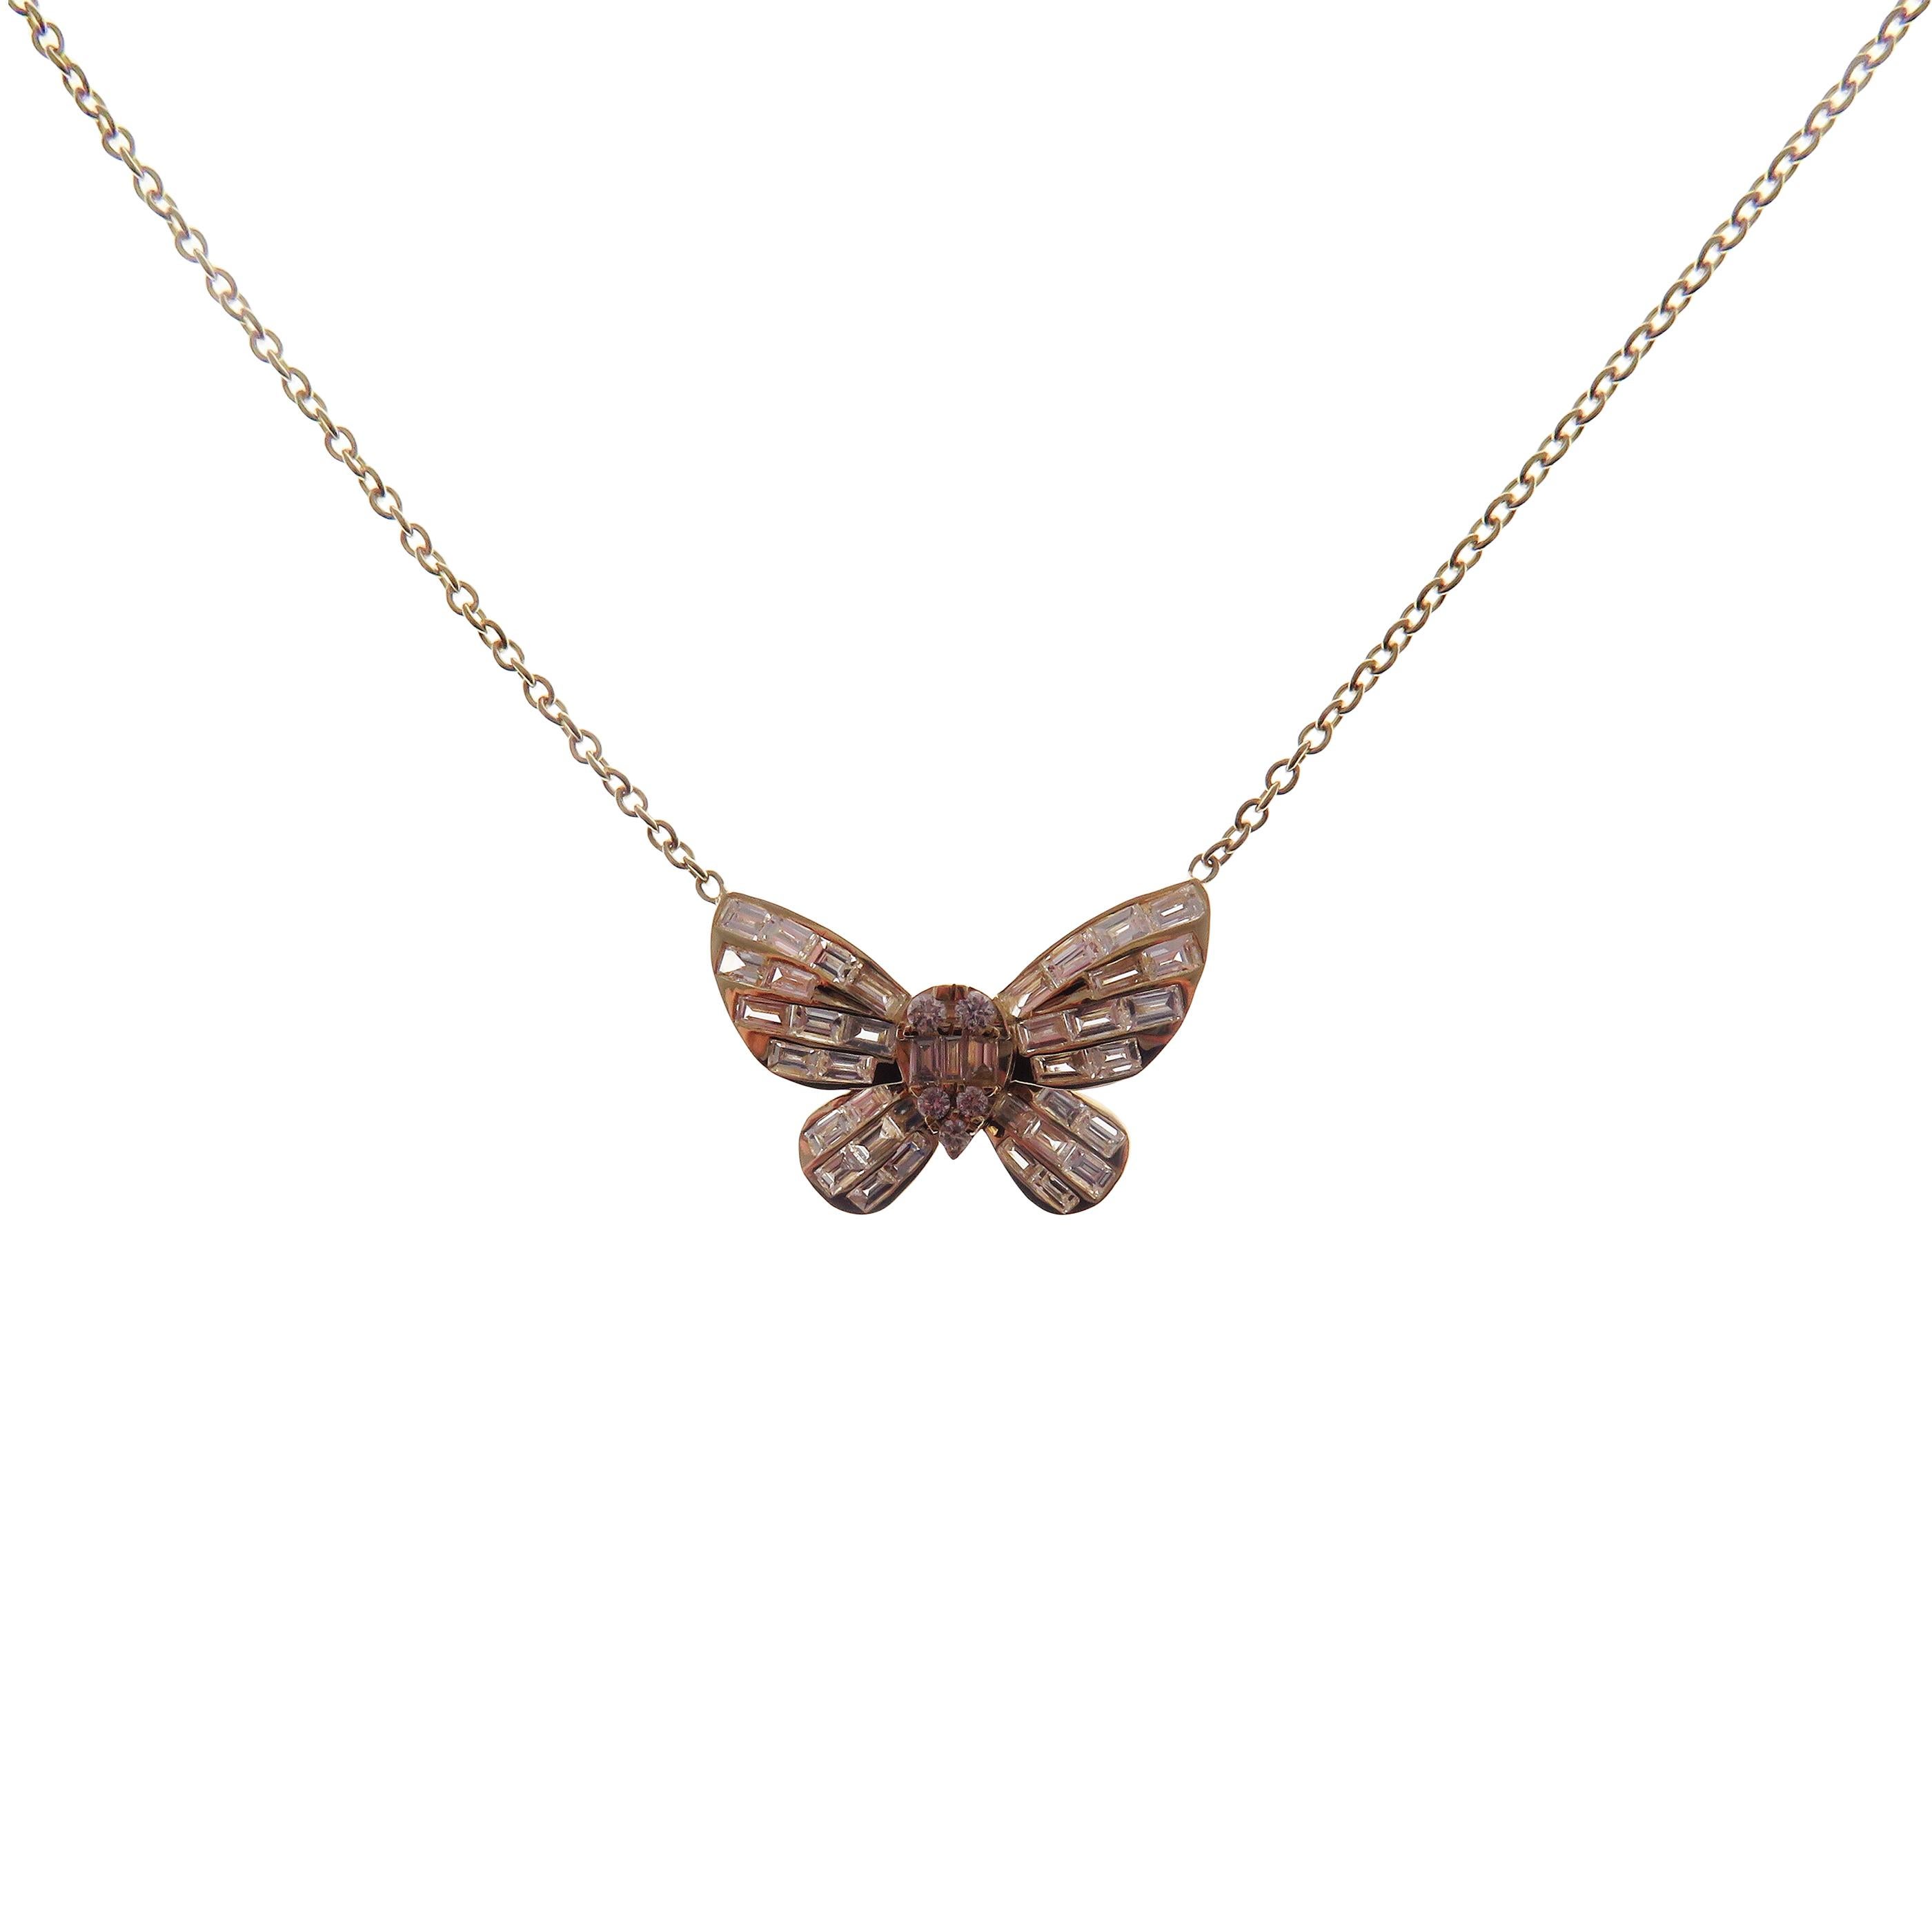 This small butterfly baguette diamond necklace is crafted in 18-karat yellow gold, weighing approximately 0.76 total carats of SI-V Quality white diamonds.

Necklace is 16